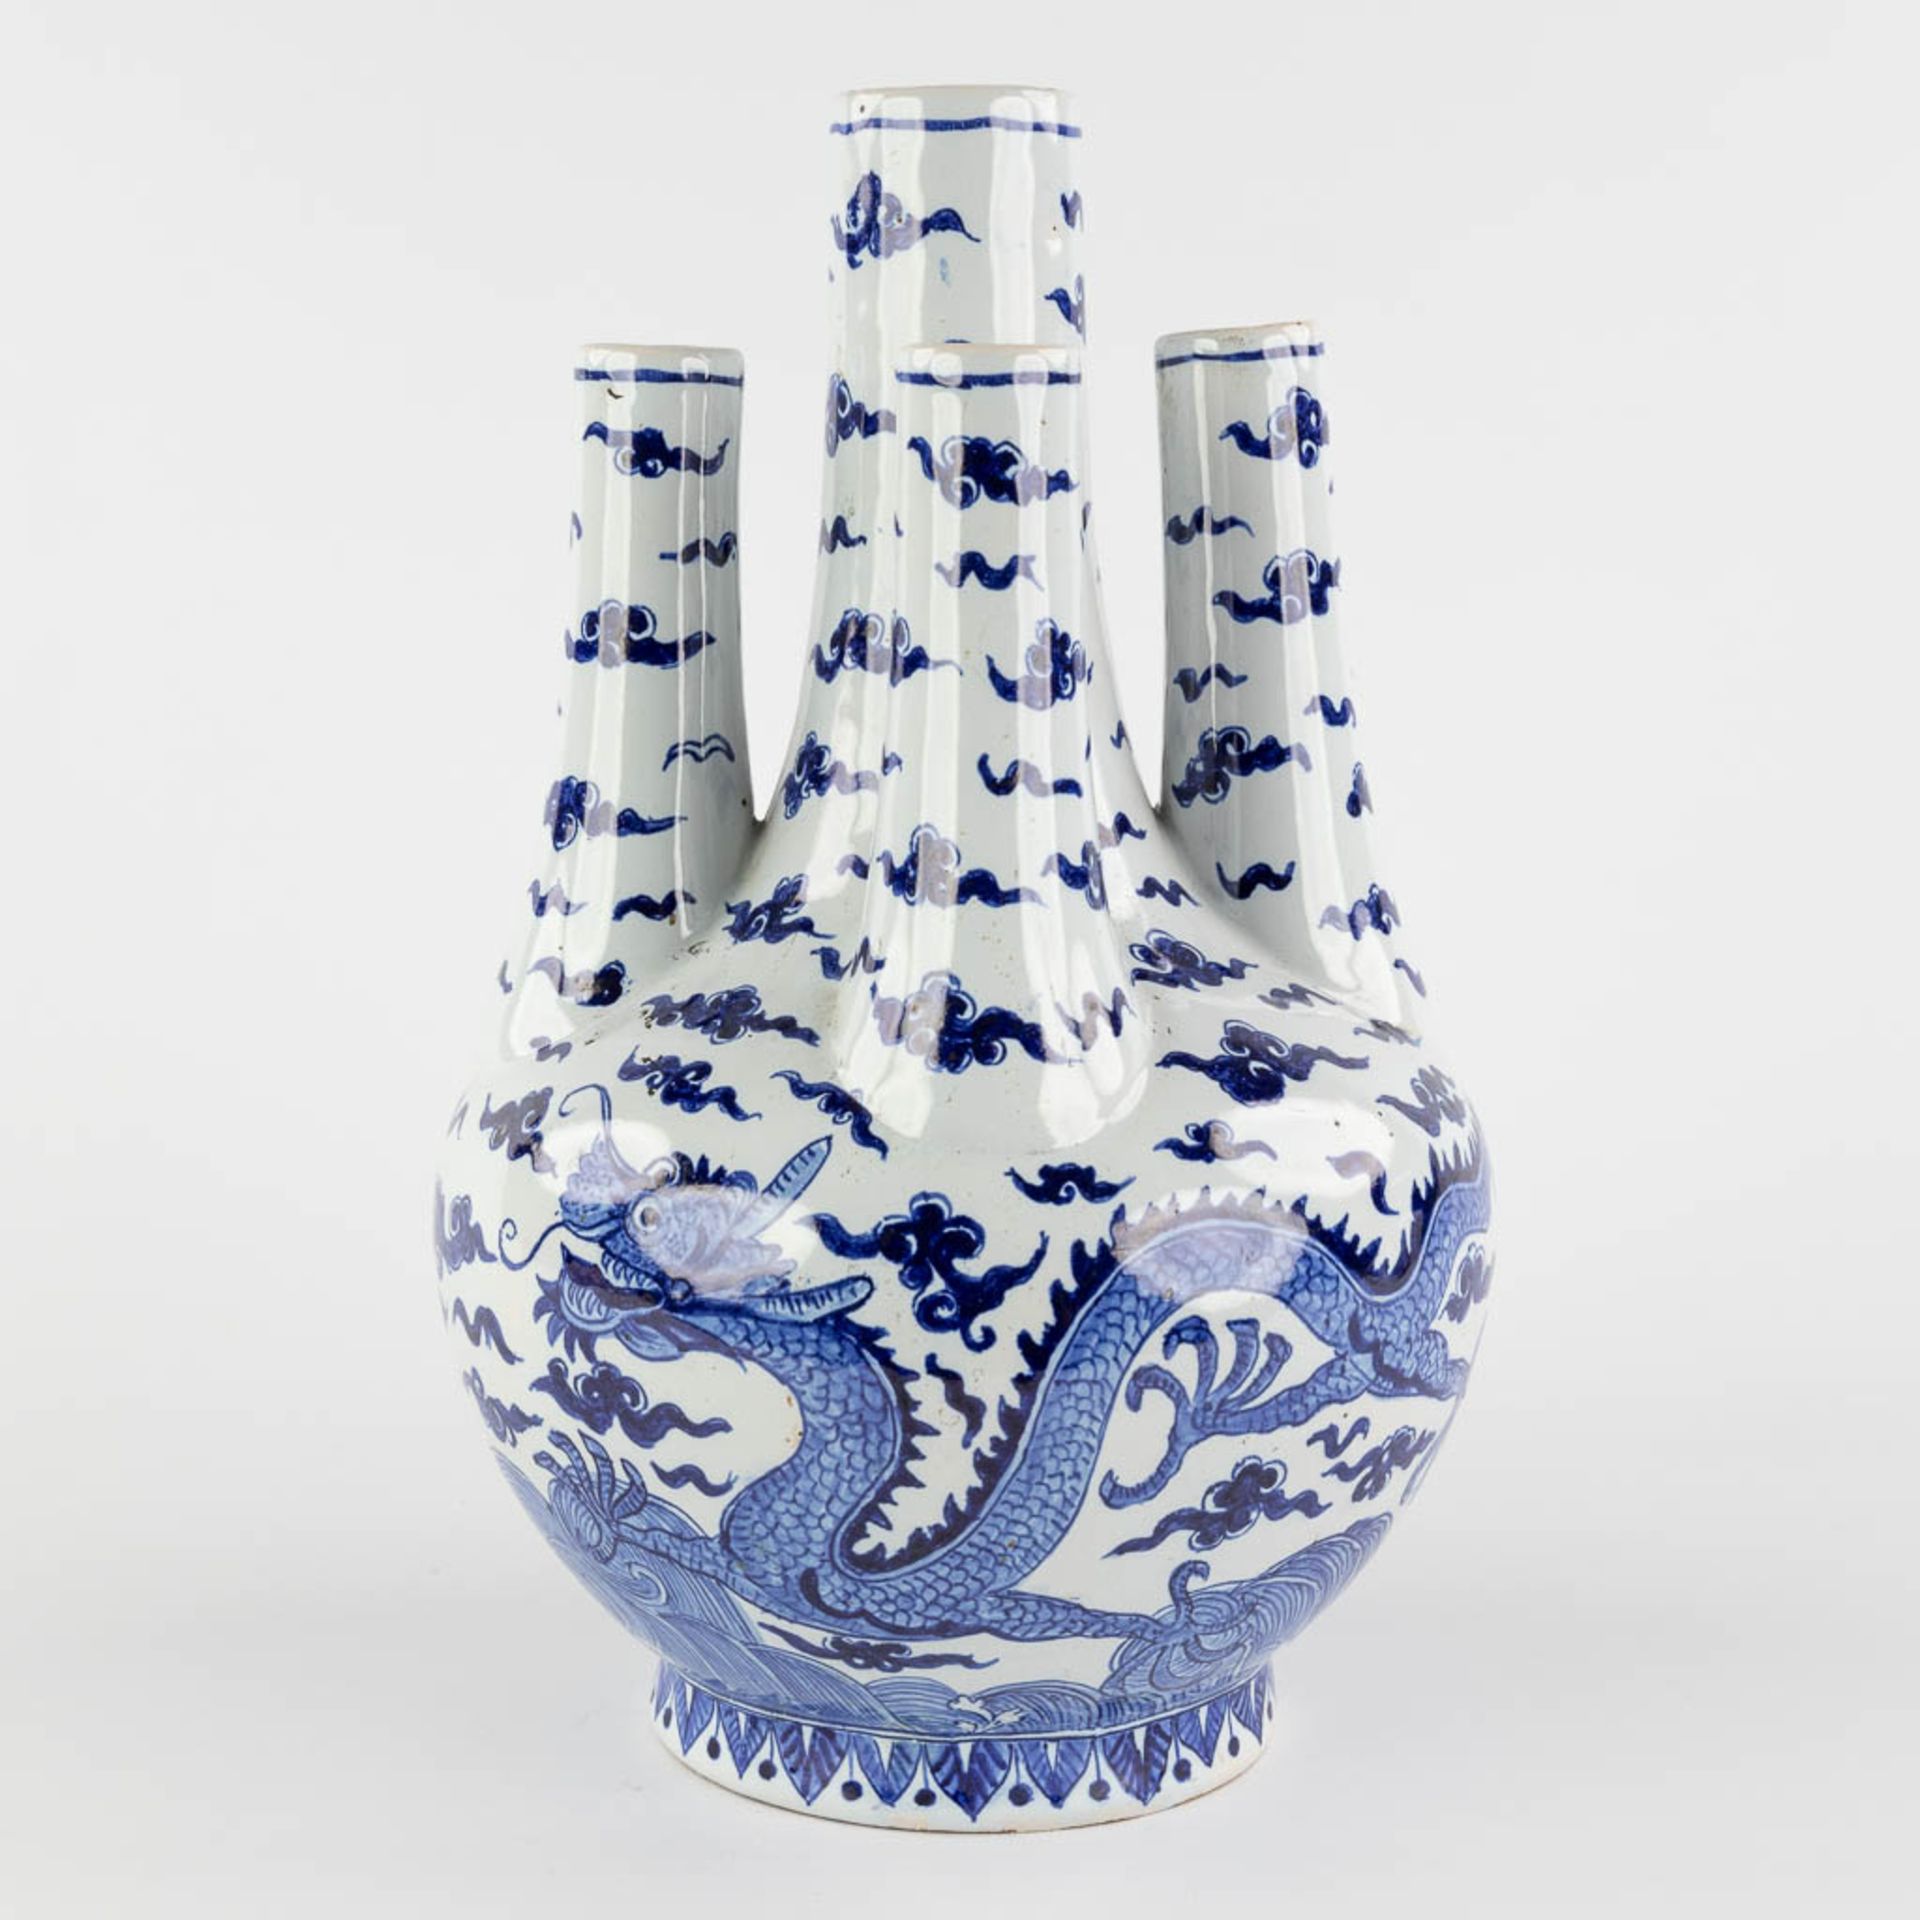 Charles-François Fourmaintraux-Courquin, a tulip vase with Chinoiserie dragon decor France. 19th C. - Image 9 of 15